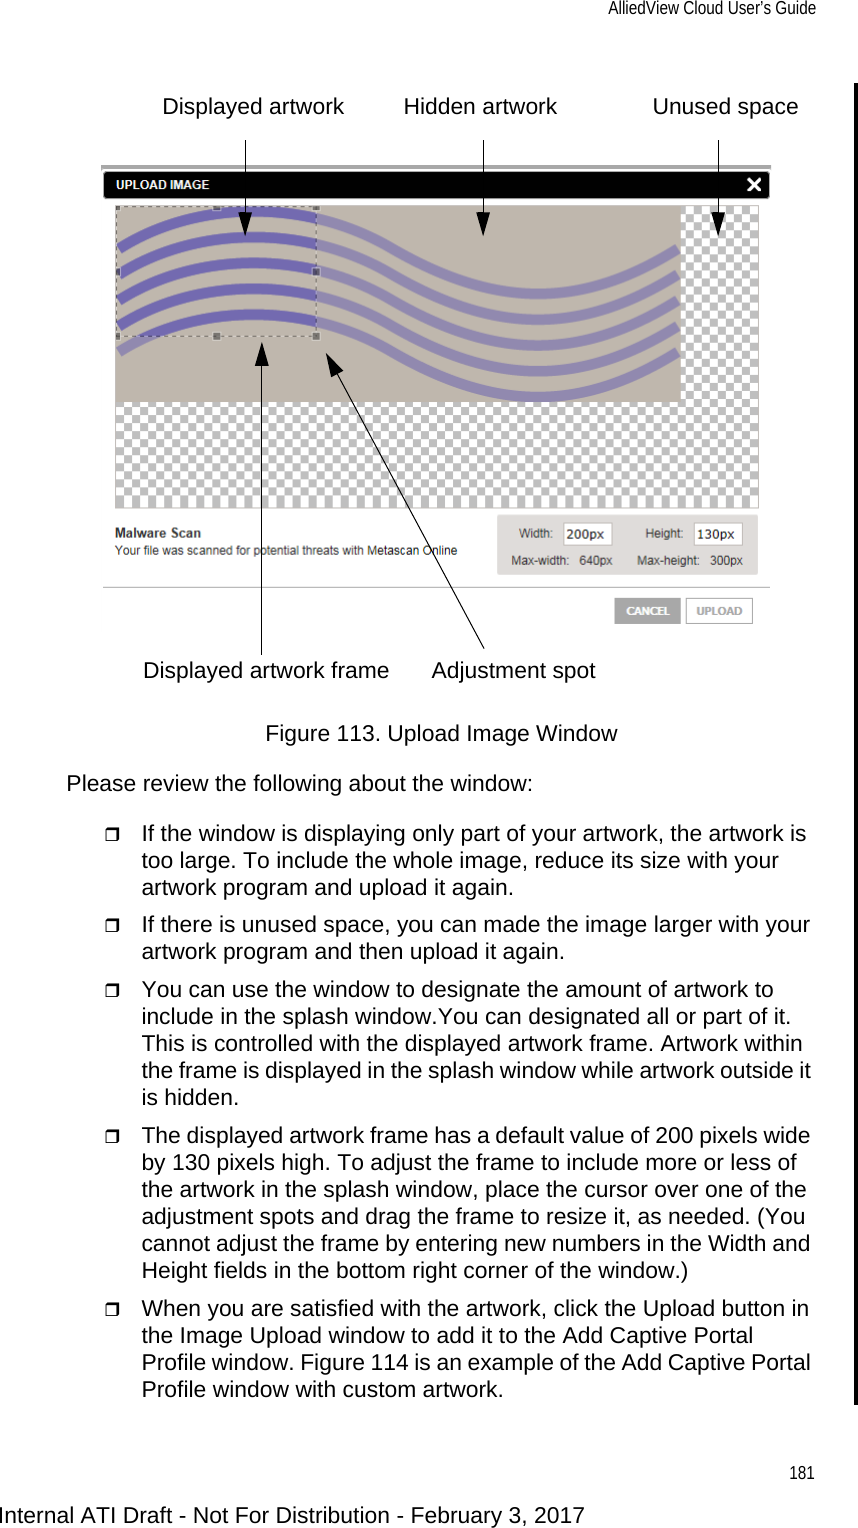 AlliedView Cloud User’s Guide181Figure 113. Upload Image WindowPlease review the following about the window:If the window is displaying only part of your artwork, the artwork is too large. To include the whole image, reduce its size with your artwork program and upload it again.If there is unused space, you can made the image larger with your artwork program and then upload it again.You can use the window to designate the amount of artwork to include in the splash window.You can designated all or part of it. This is controlled with the displayed artwork frame. Artwork within the frame is displayed in the splash window while artwork outside it is hidden.The displayed artwork frame has a default value of 200 pixels wide by 130 pixels high. To adjust the frame to include more or less of the artwork in the splash window, place the cursor over one of the adjustment spots and drag the frame to resize it, as needed. (You cannot adjust the frame by entering new numbers in the Width and Height fields in the bottom right corner of the window.)When you are satisfied with the artwork, click the Upload button in the Image Upload window to add it to the Add Captive Portal Profile window. Figure 114 is an example of the Add Captive Portal Profile window with custom artwork.Unused spaceHidden artworkDisplayed artworkDisplayed artwork frame Adjustment spotInternal ATI Draft - Not For Distribution - February 3, 2017